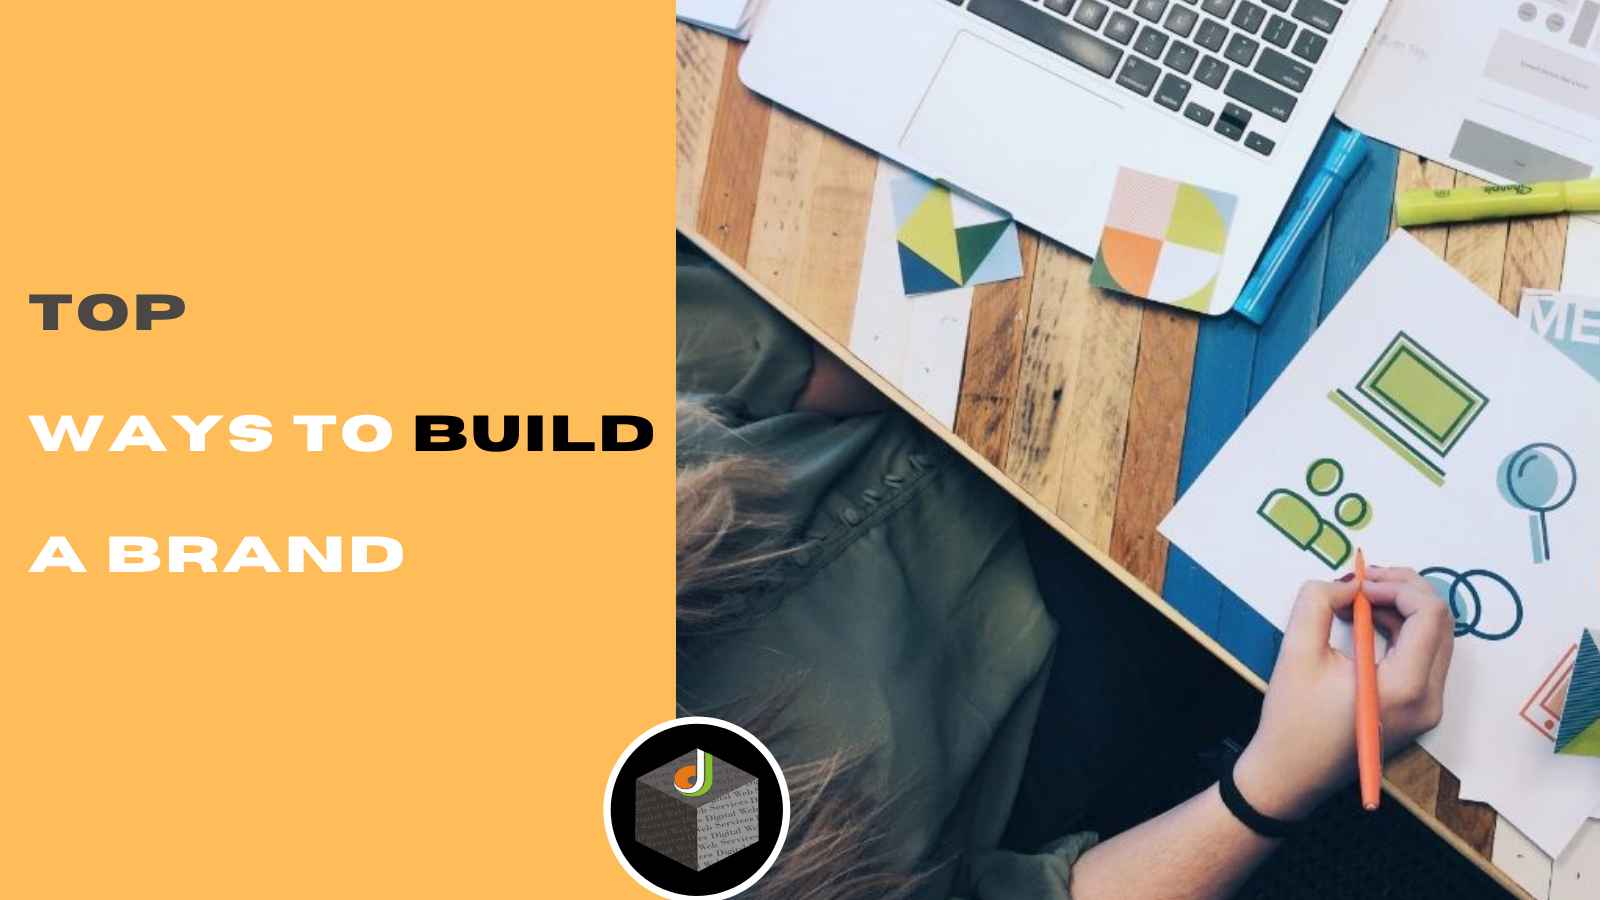 Top Ways to Build a Brand